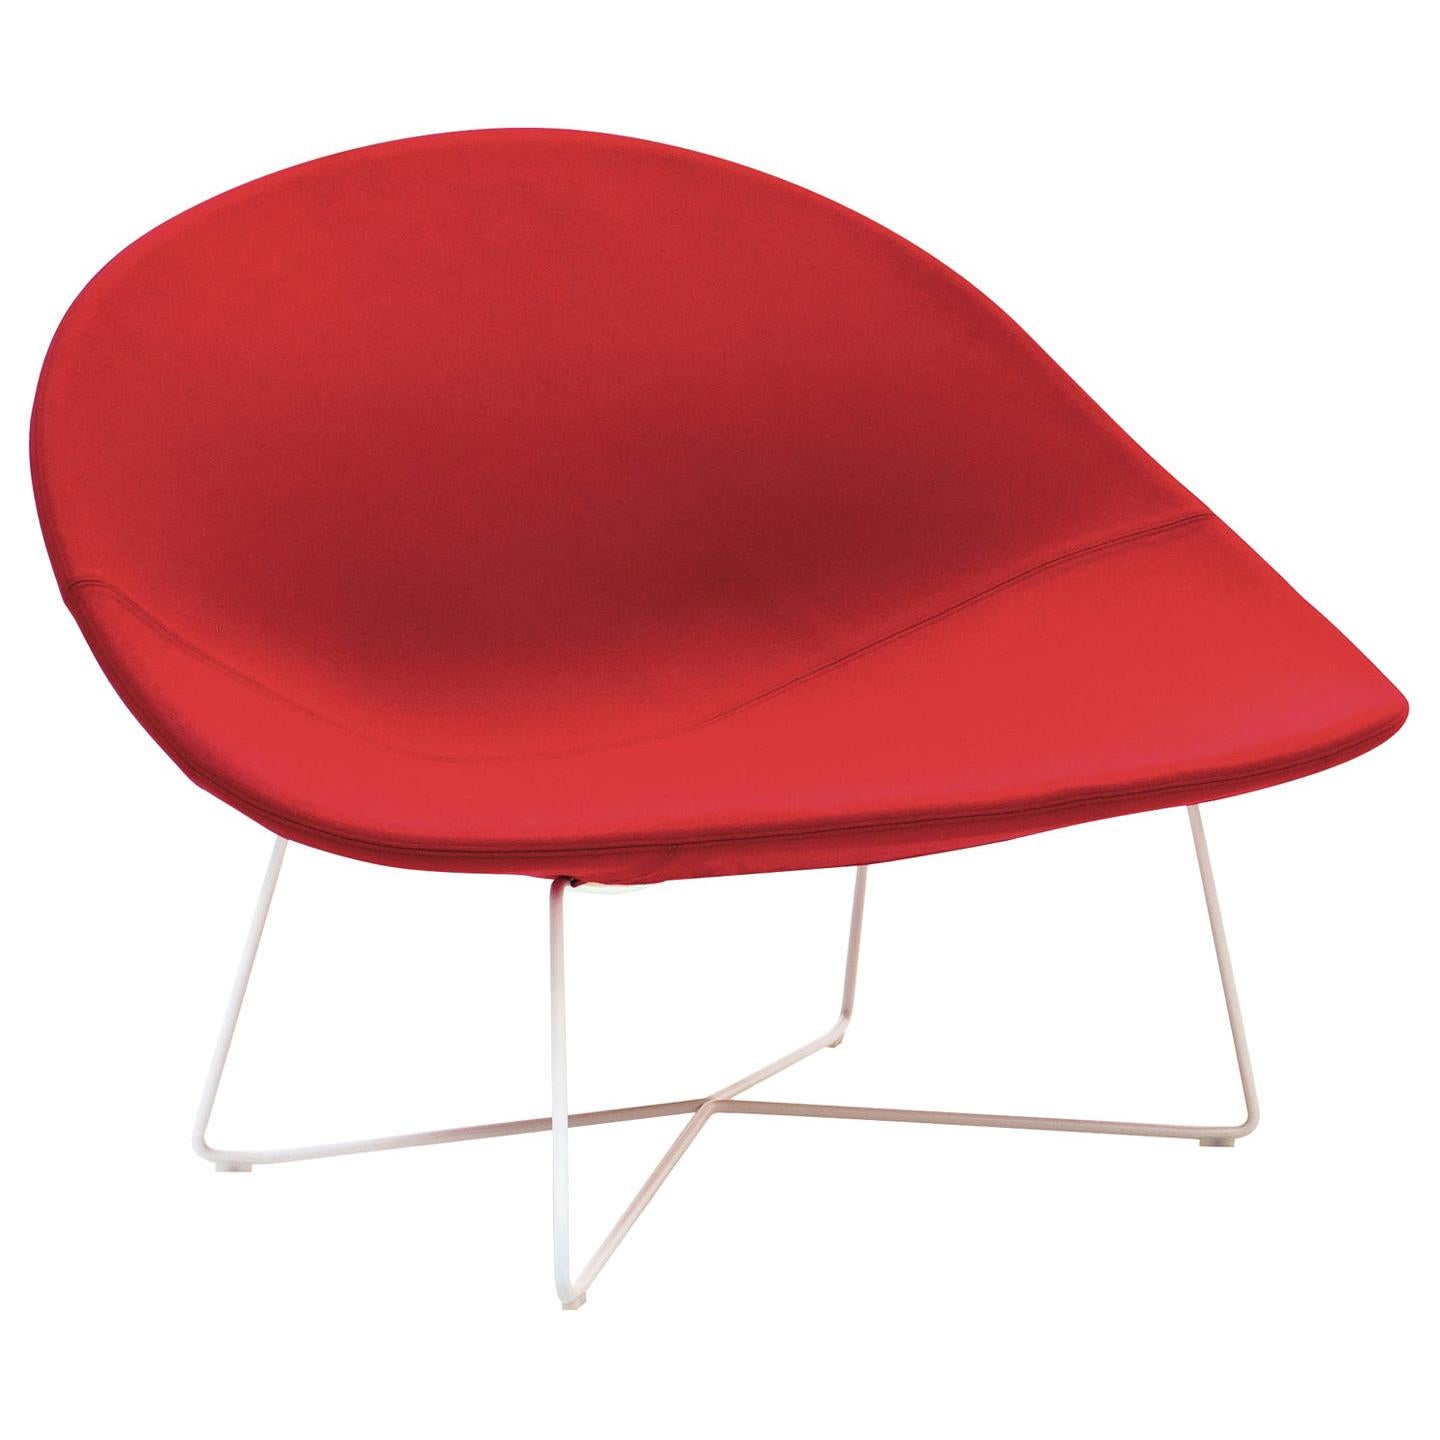 Isola Red Accent Chair by Claesson Koivisto Rune